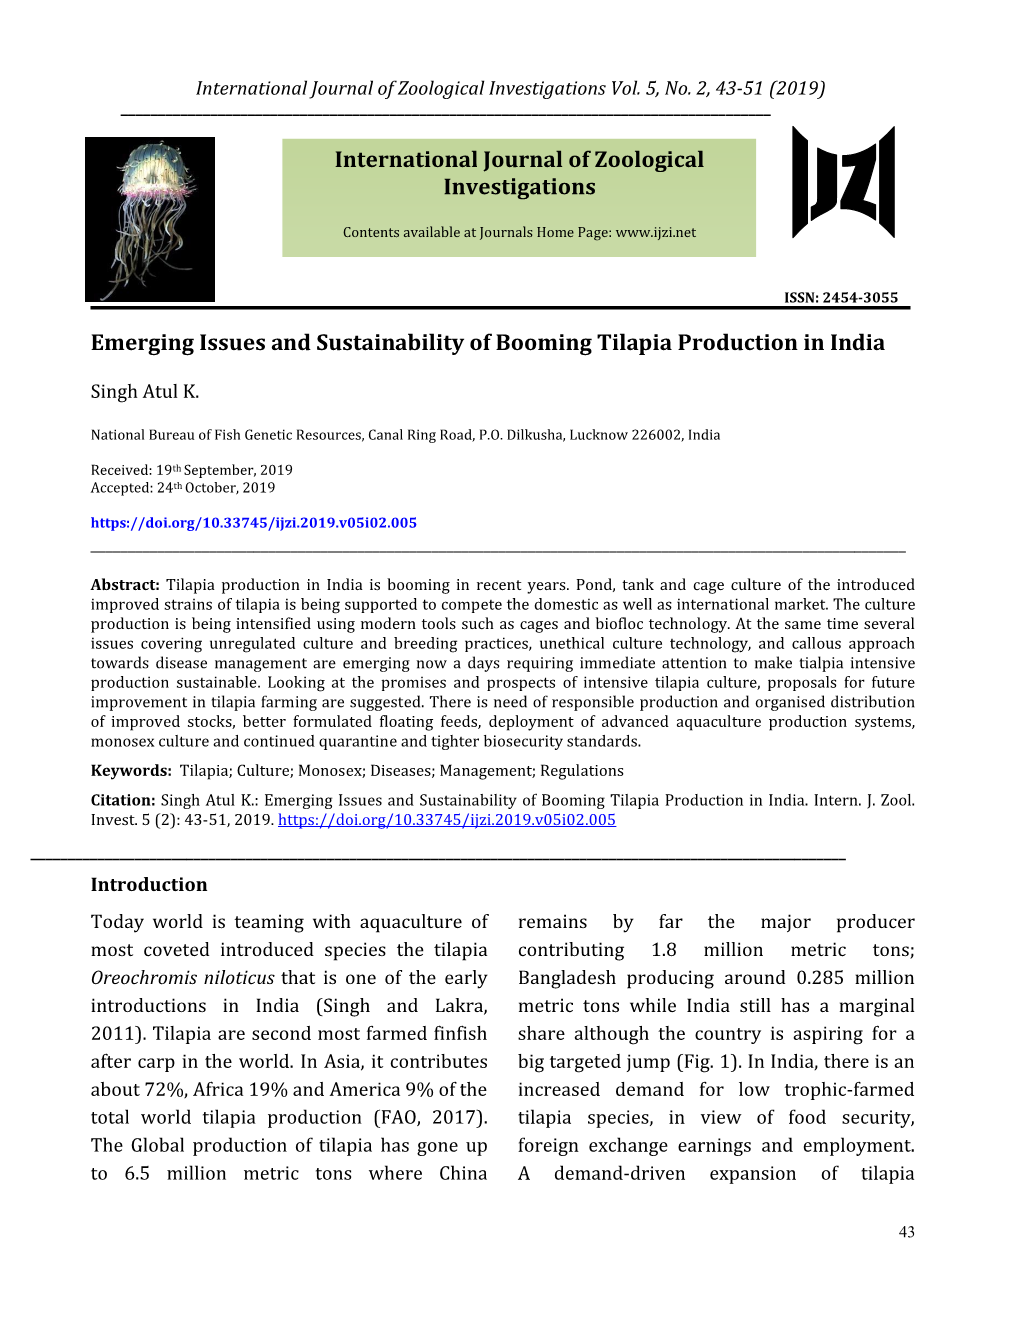 Emerging Issues and Sustainability of Booming Tilapia Production in India International Journal of Zoological Investigations